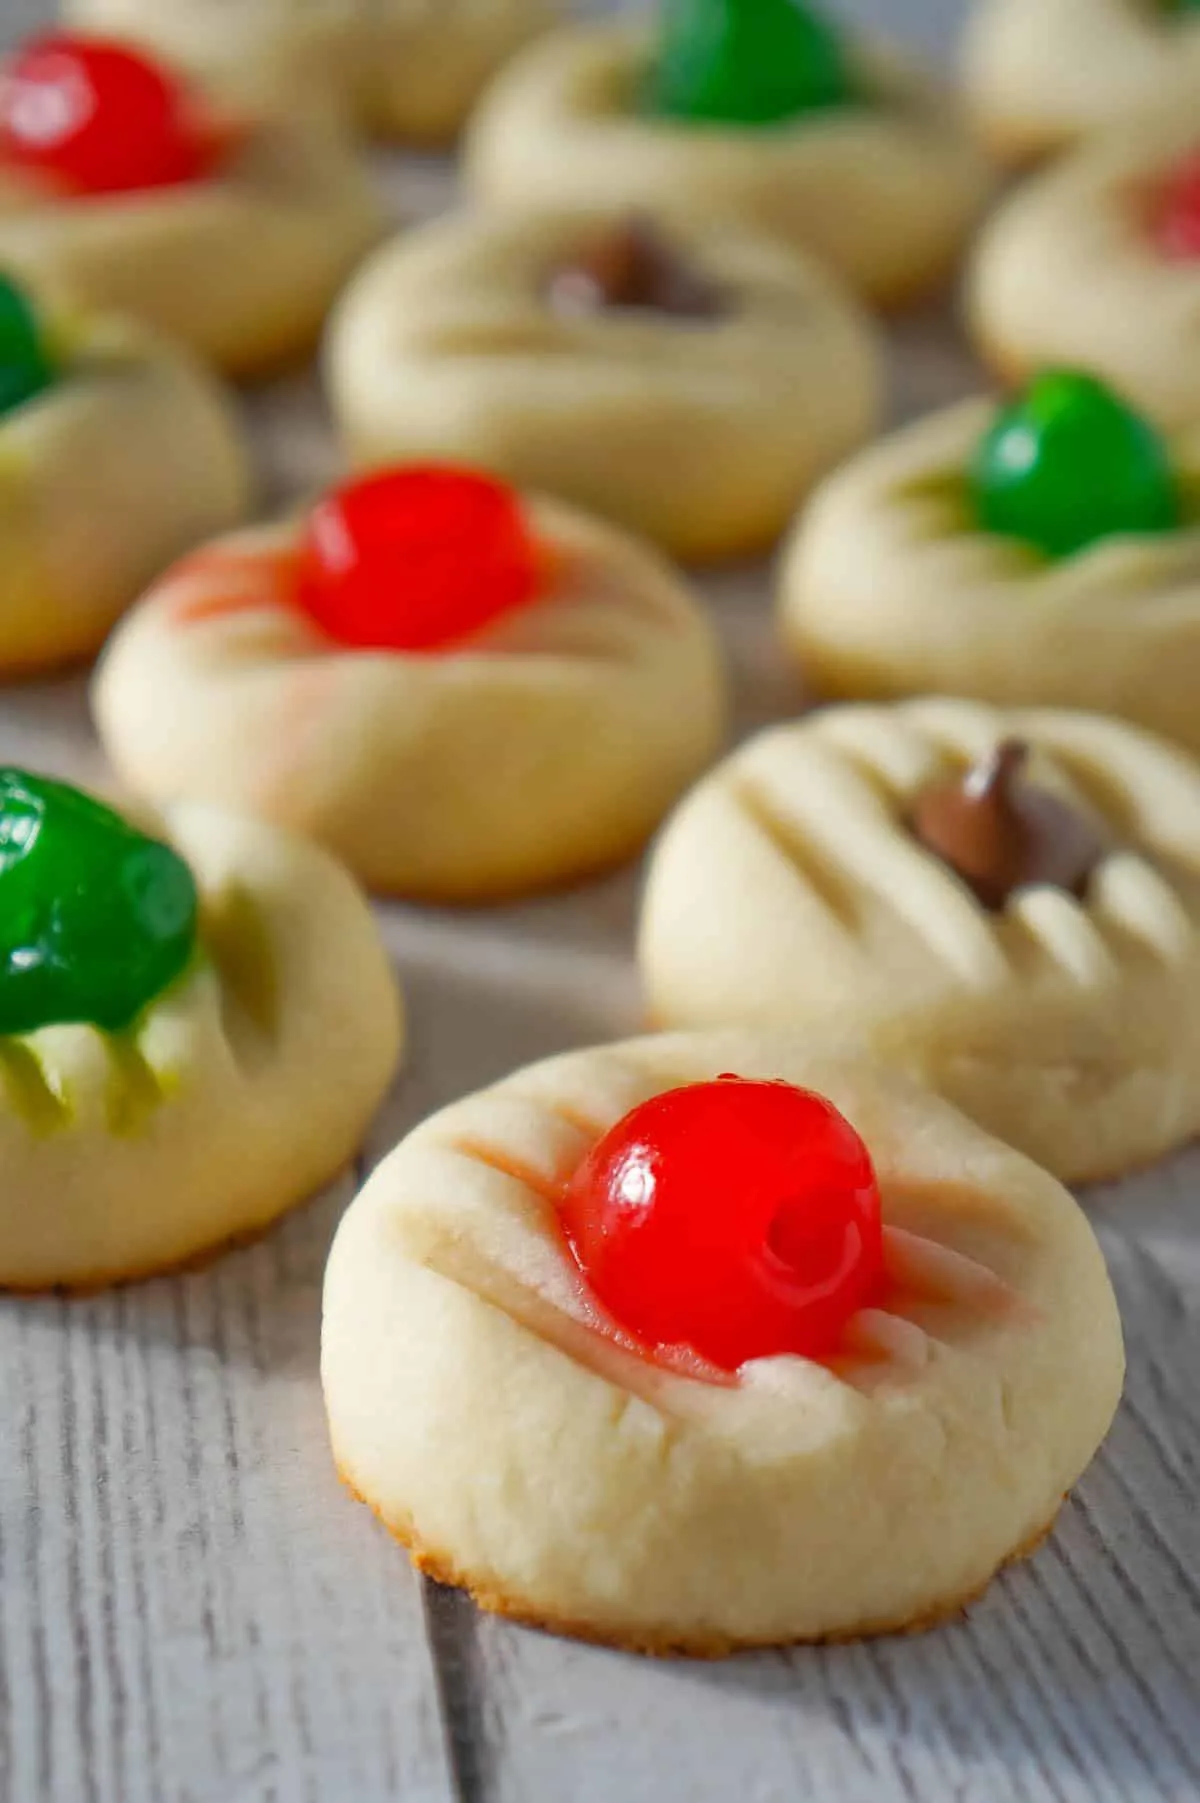 Whipped Christmas Shortbread Cookies are a buttery holiday cookie recipe that can be topped with maraschino cherries and Hershey's mini kisses.